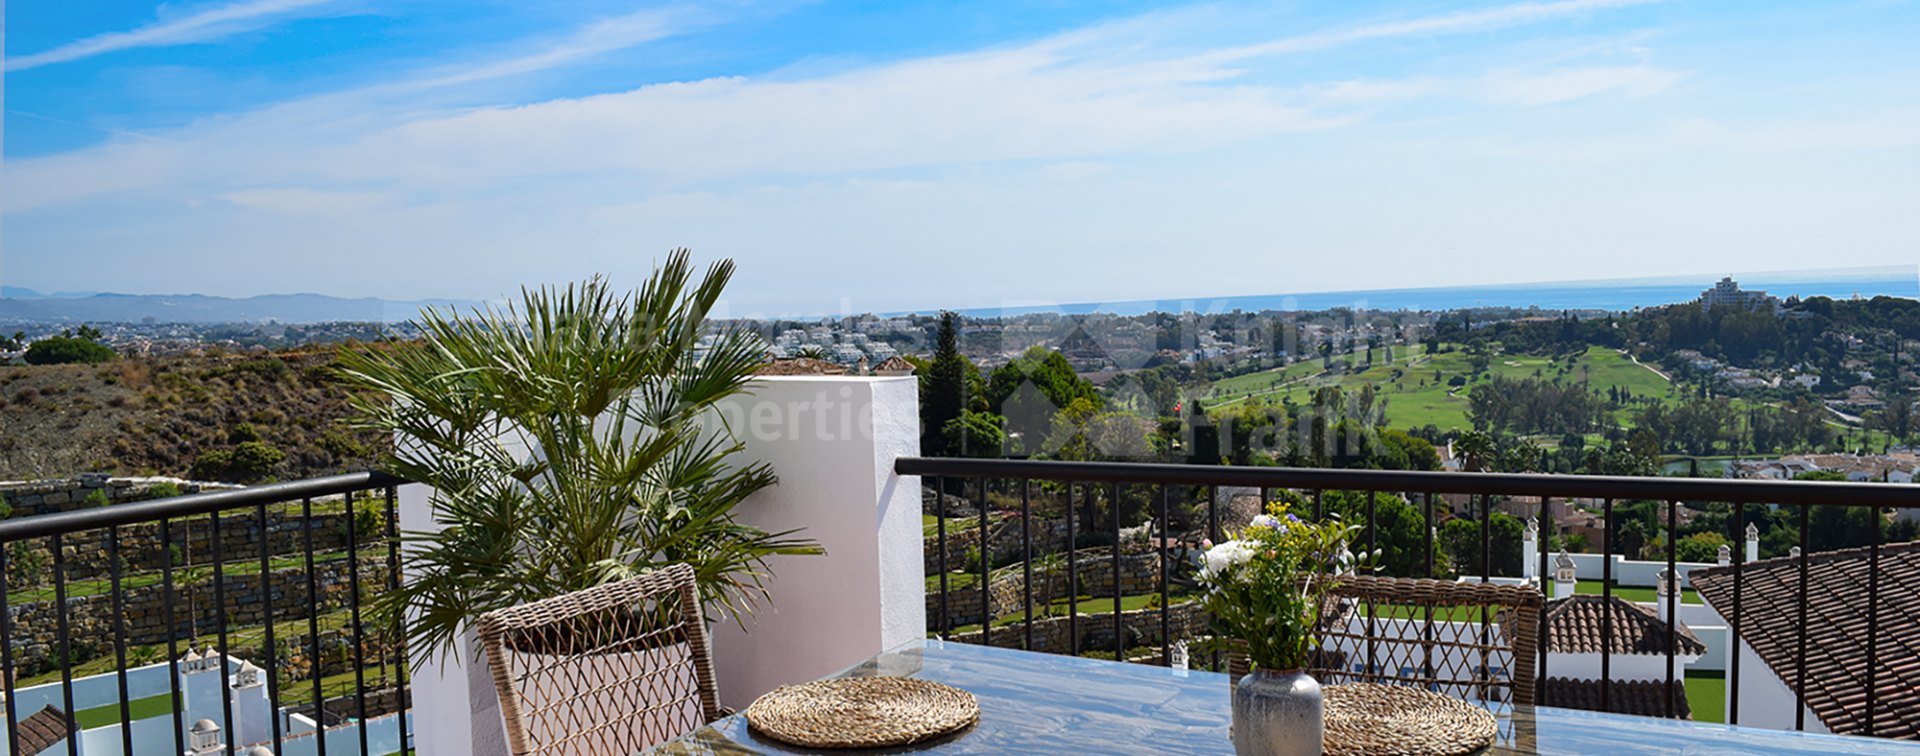 El Paraiso, Two-bedroom penthouse with solarium in gated community with amenities